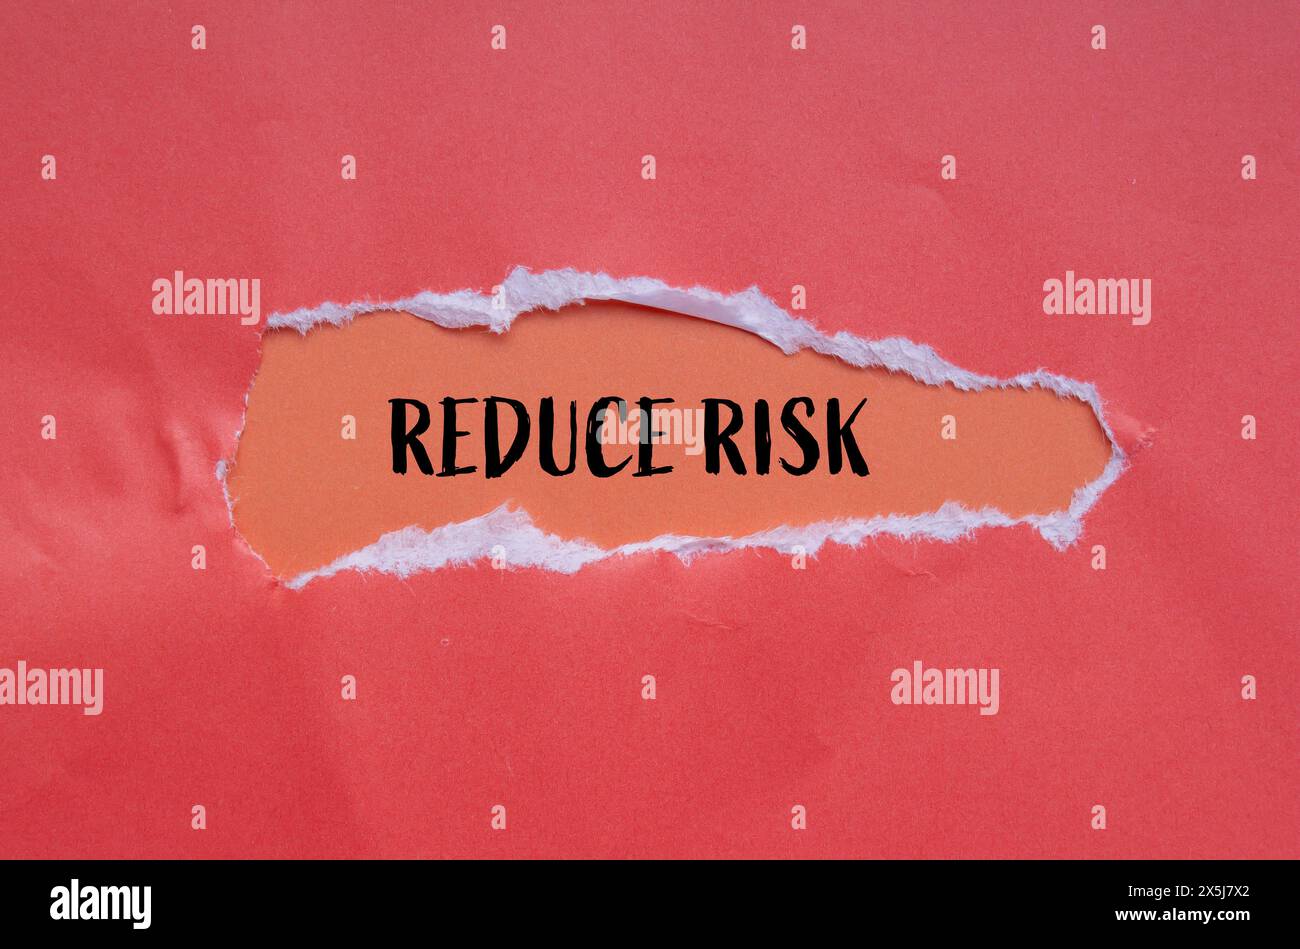 Reduce risk words written on torn paper with orange background. Conceptual reduce risk symbol. Copy space. Stock Photo